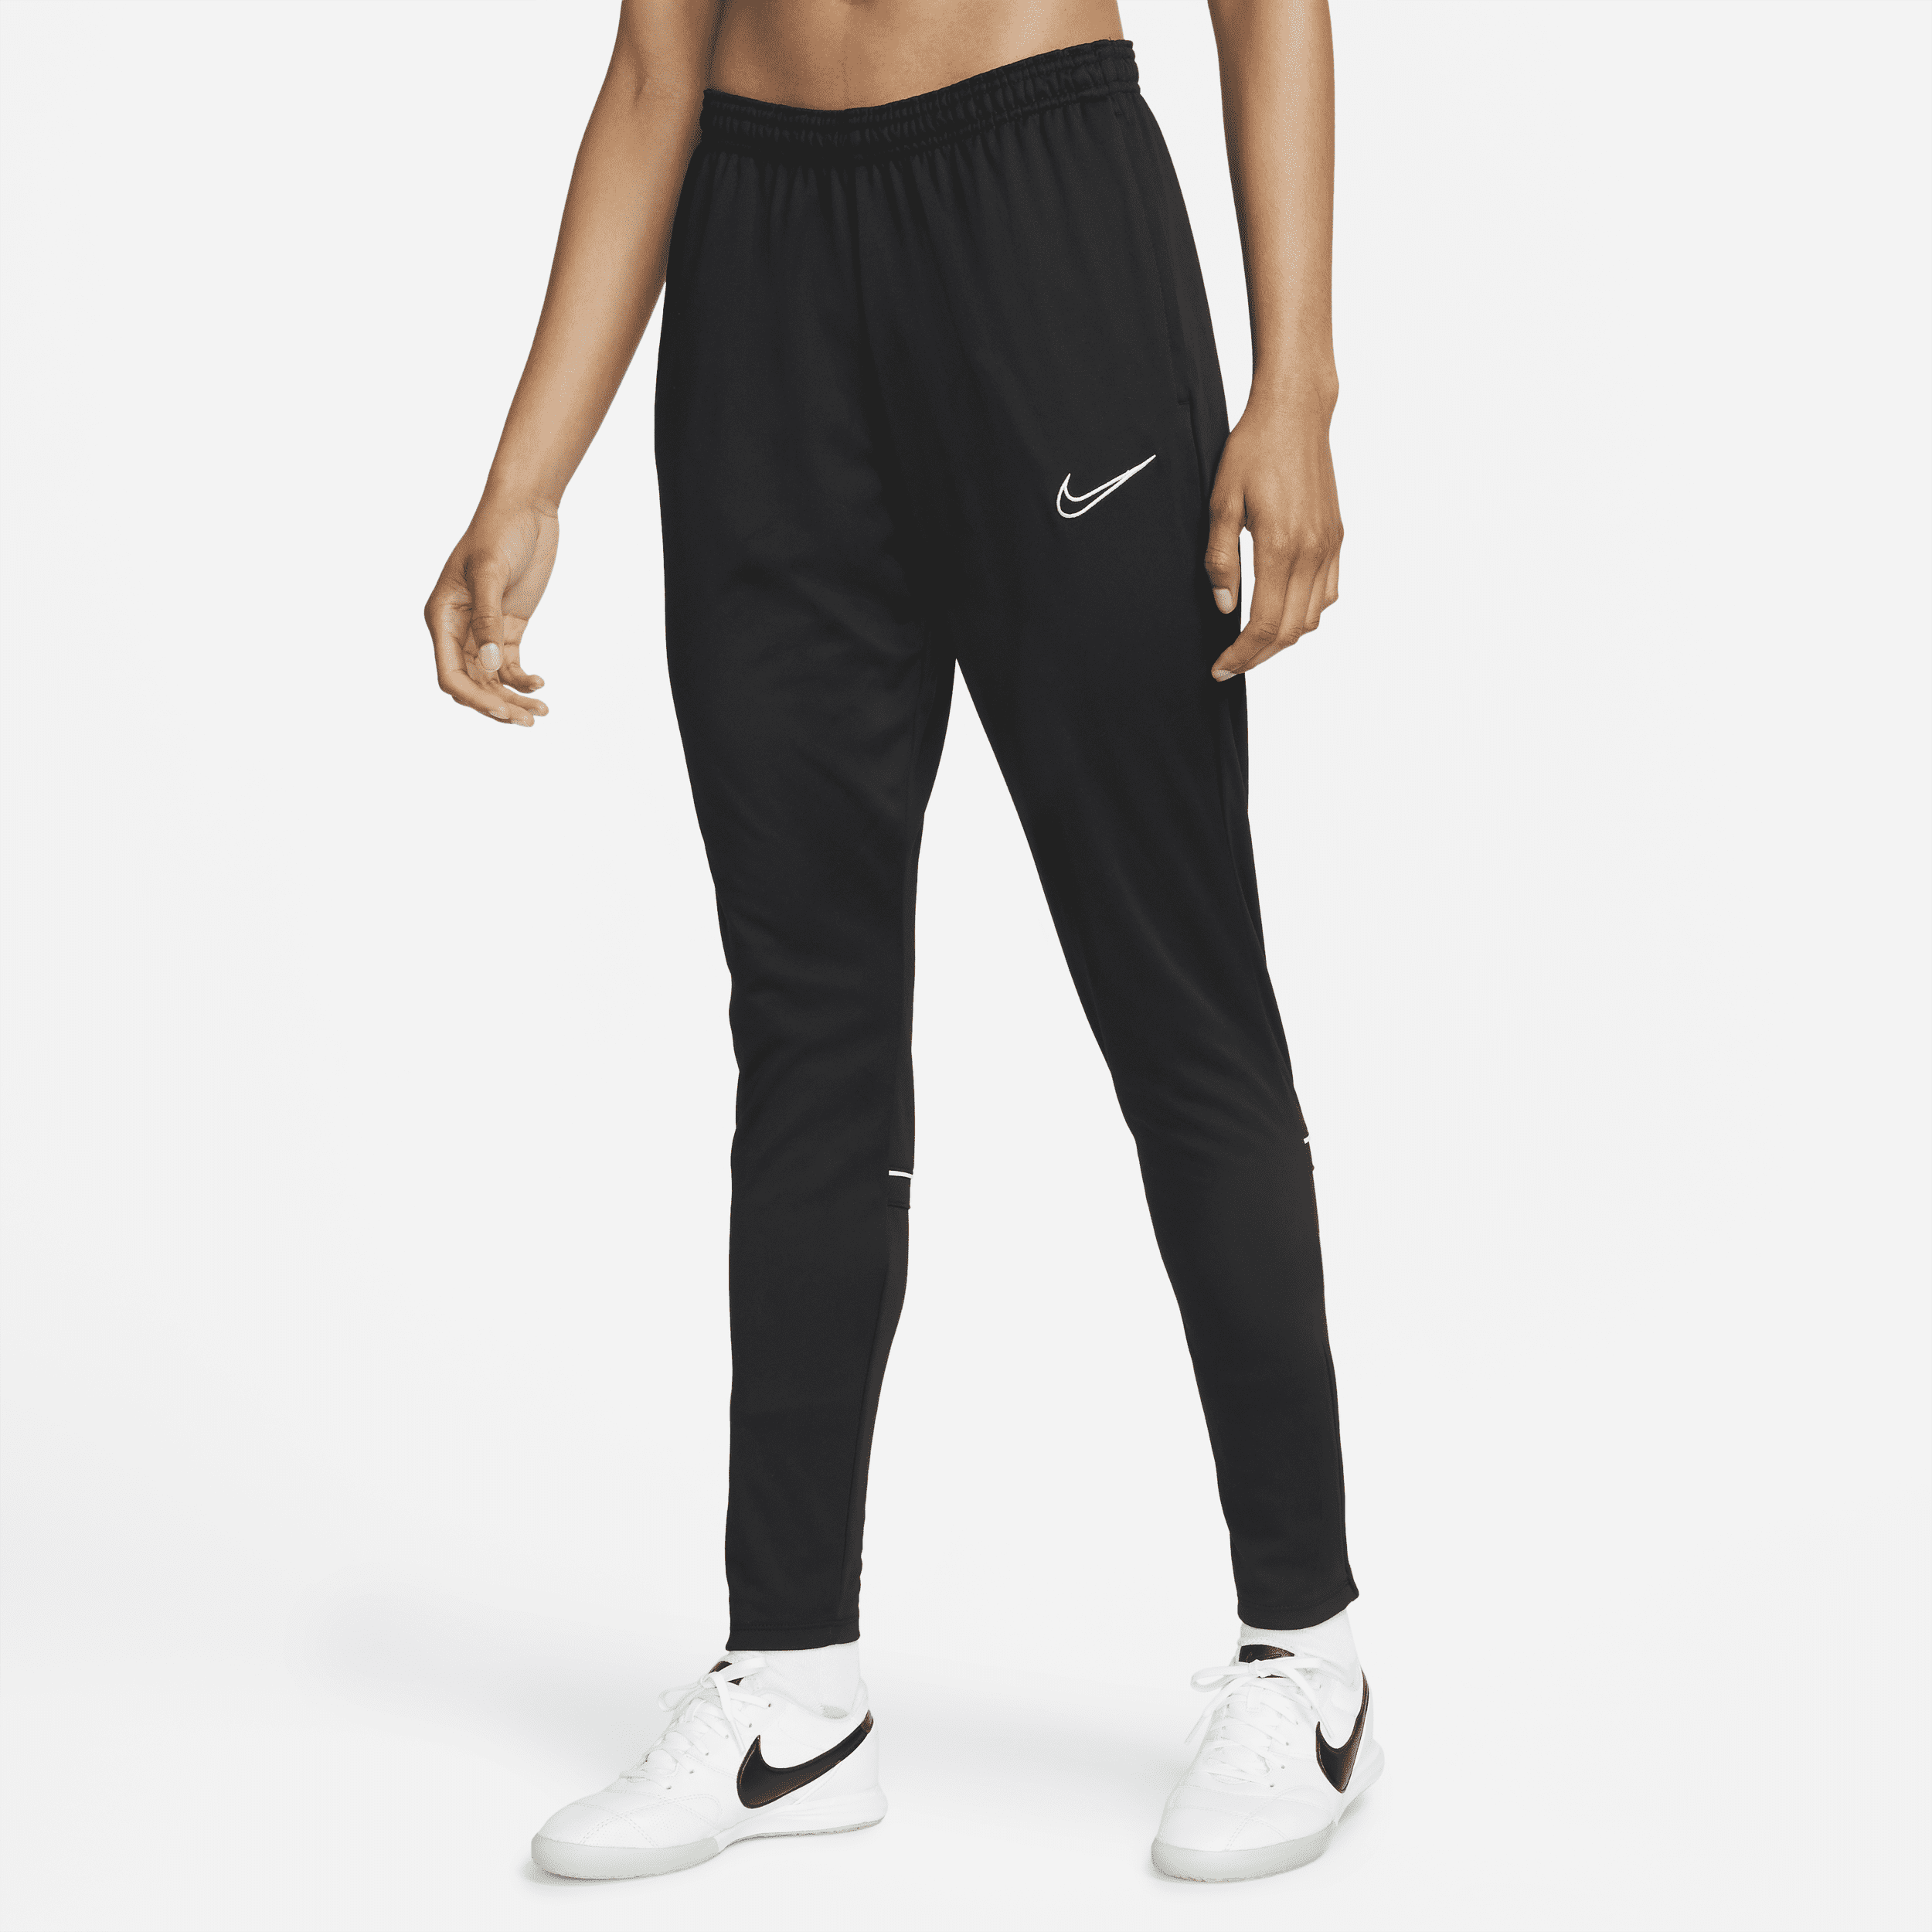 Nike Football Dry Academy Joggers In Navy 839363451  Nike clothes mens  Mens outfits Track pants mens